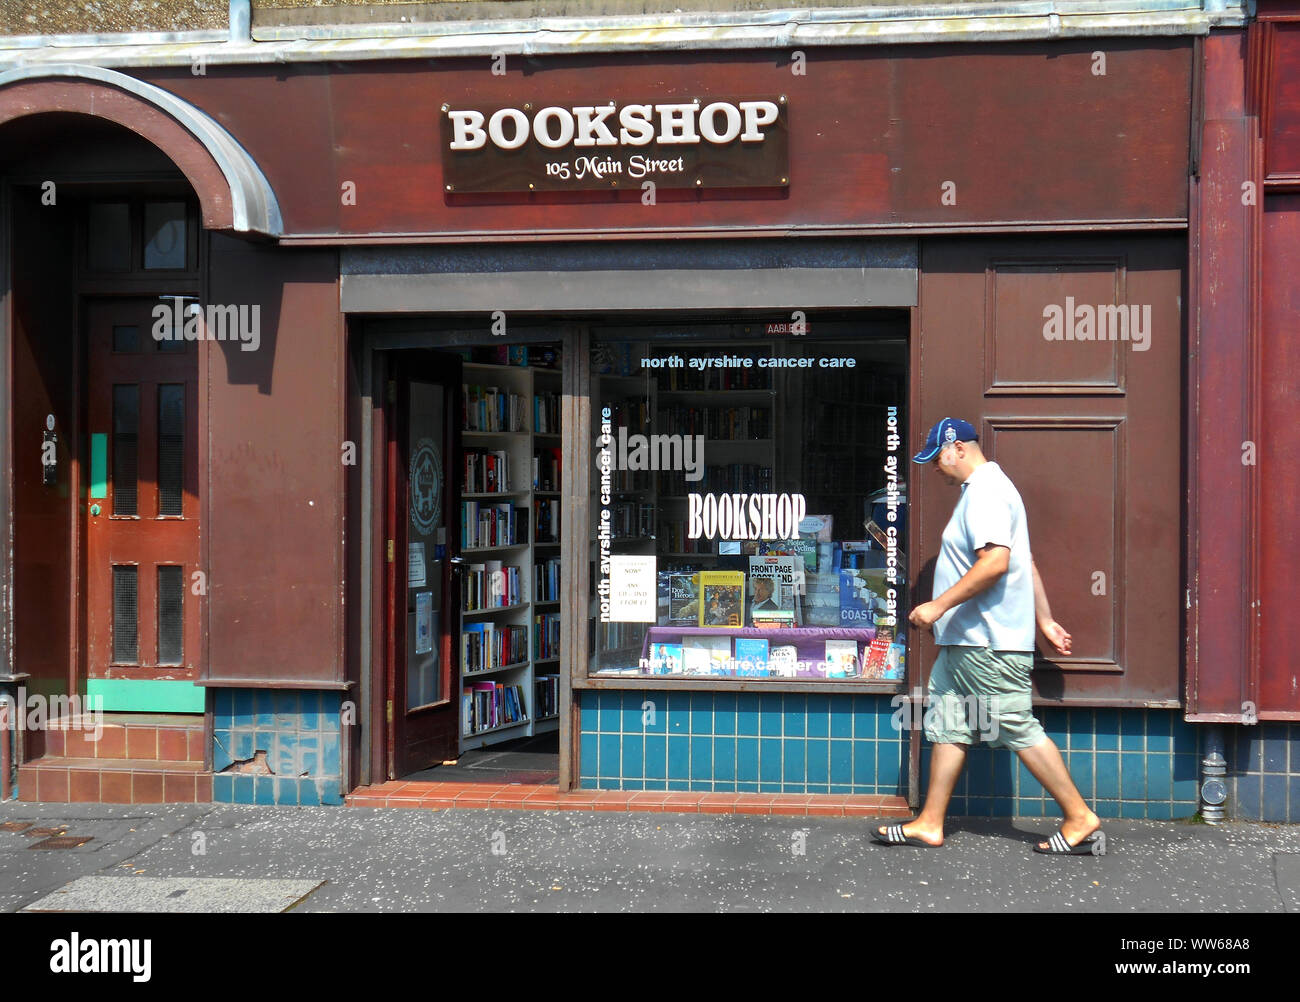 A wonderful 2nd hand bookshop on the main street in the sea side, holiday town. of Largs on the Firth of Clyde in Scotland. The shop is stacked with many, many books and proceeds from the sale of the books goes to The North Ayrshire Cancer Care. Alan Wylie/ALAMY © Stock Photo